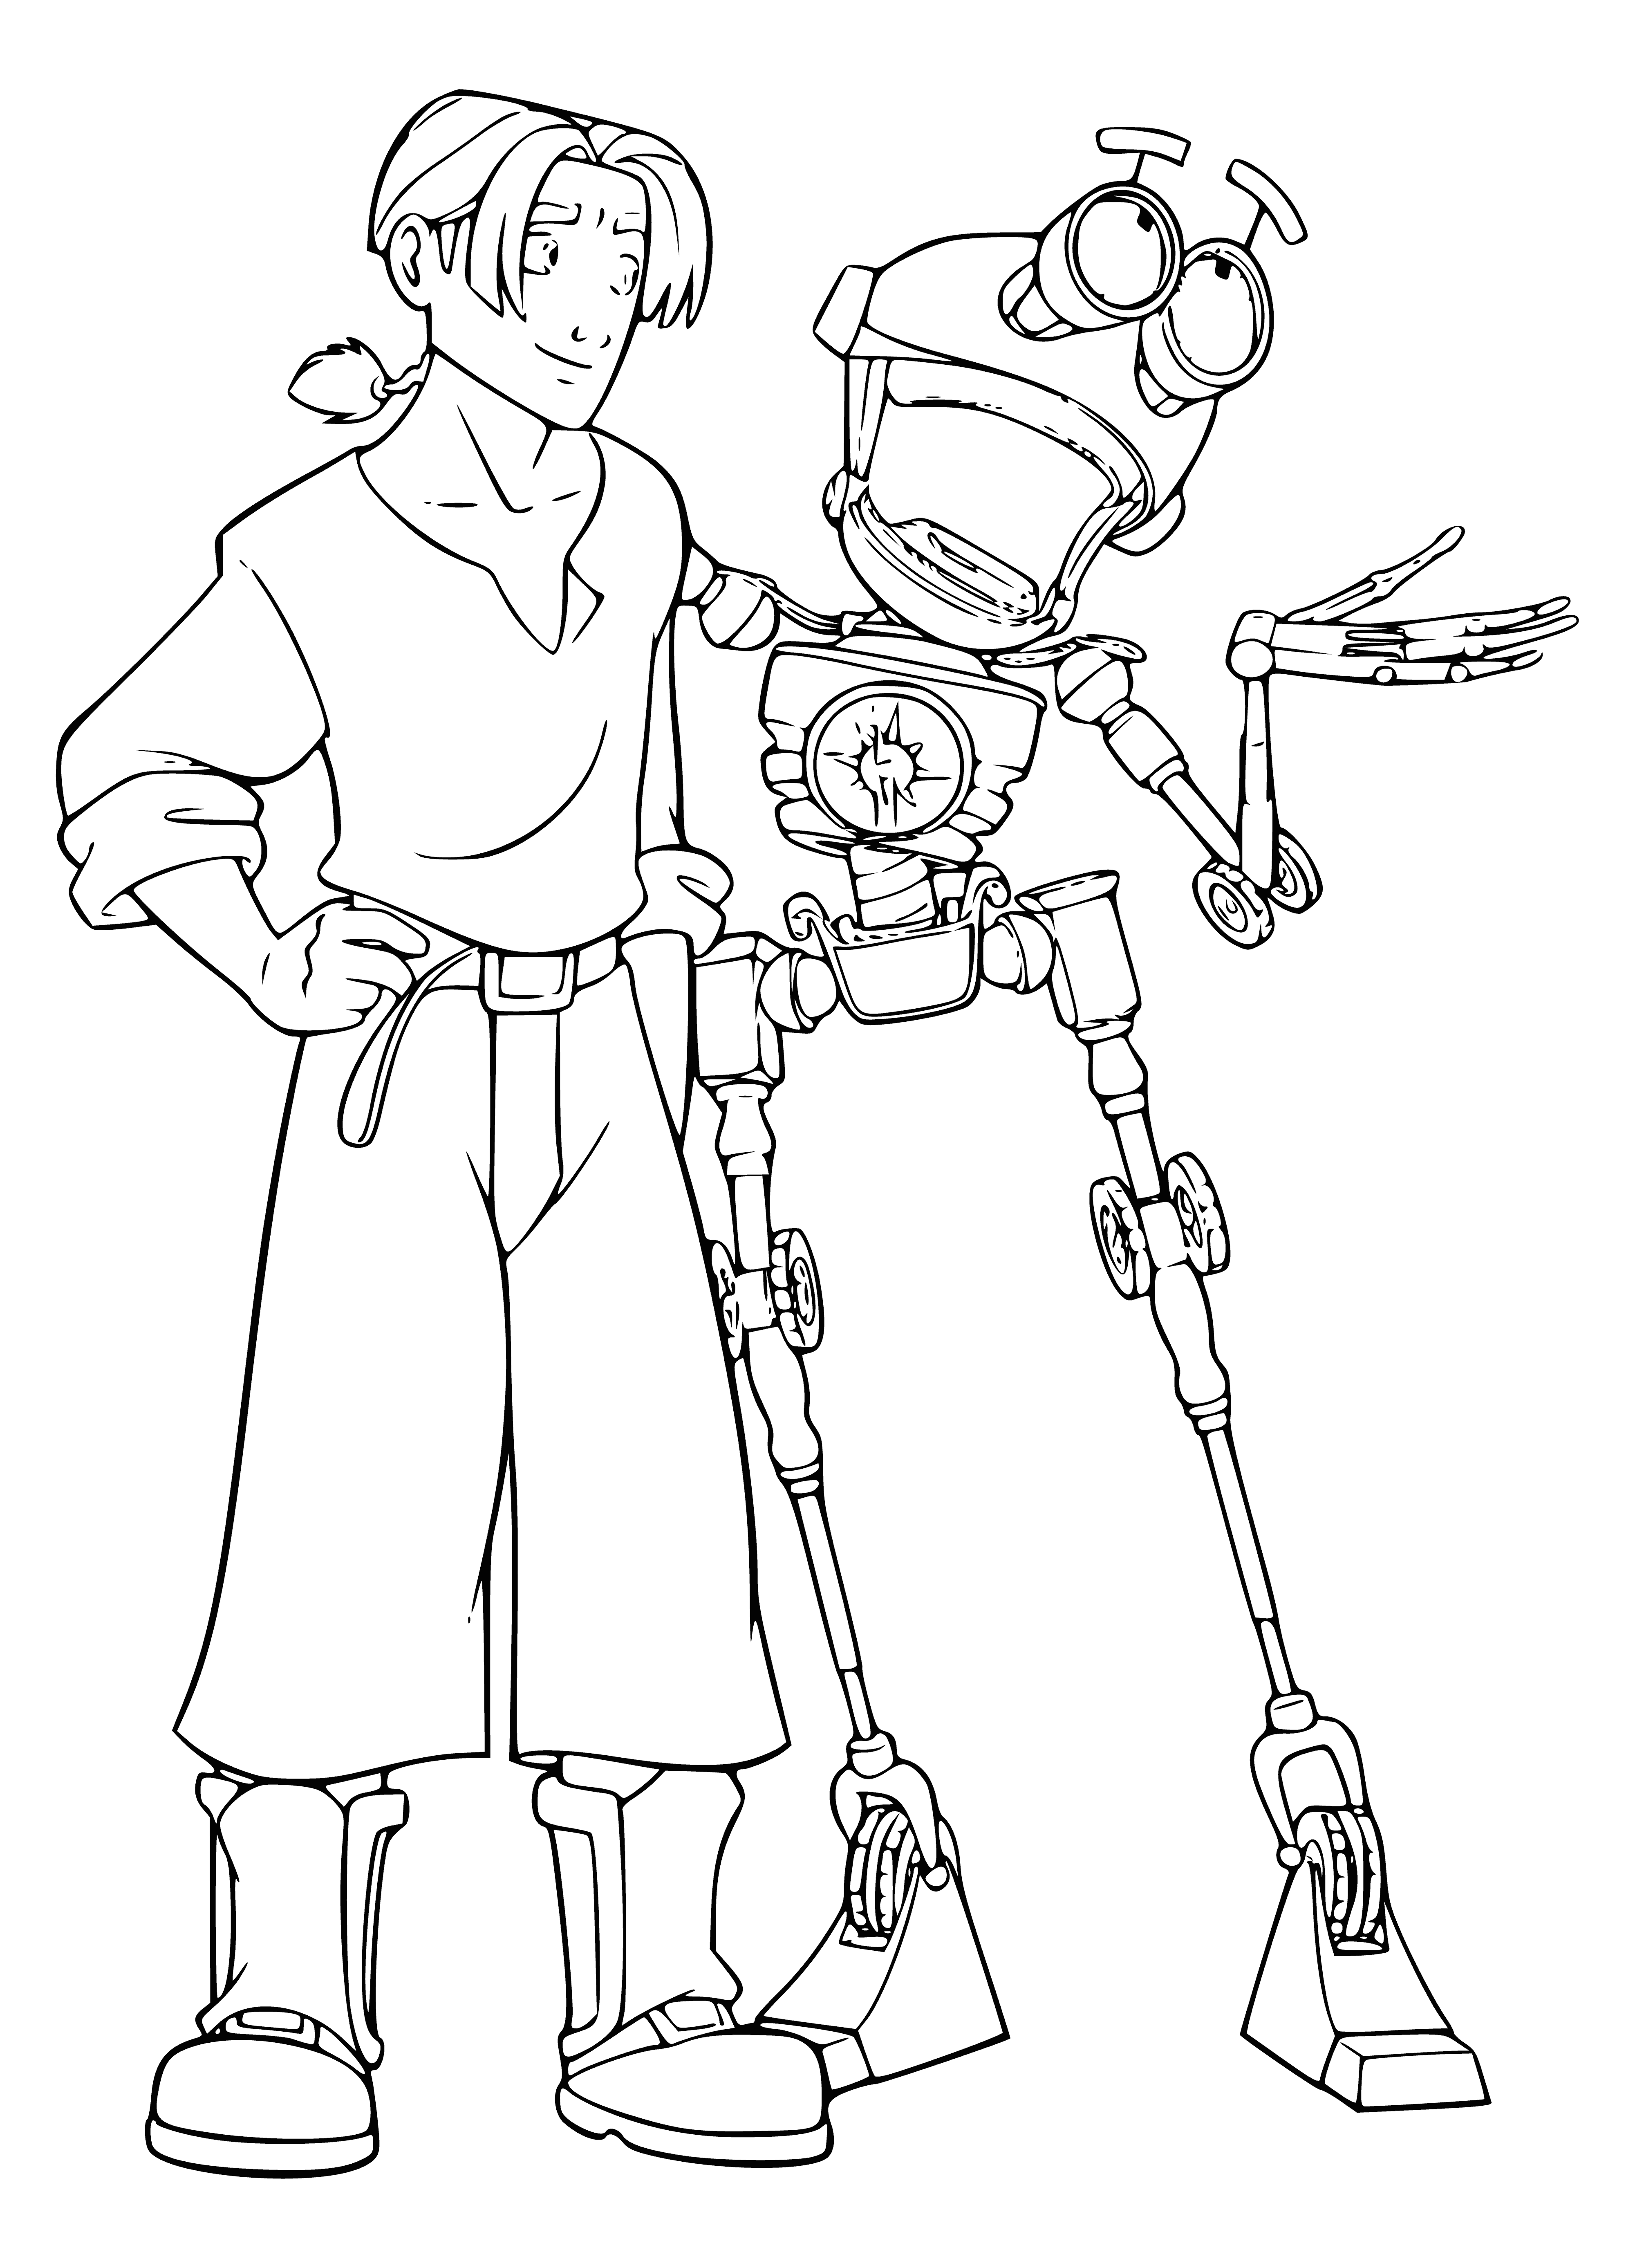 coloring page: Jim & Dr. Delbert look surprised next to a big map of Treasure Planet, holding a sphere.